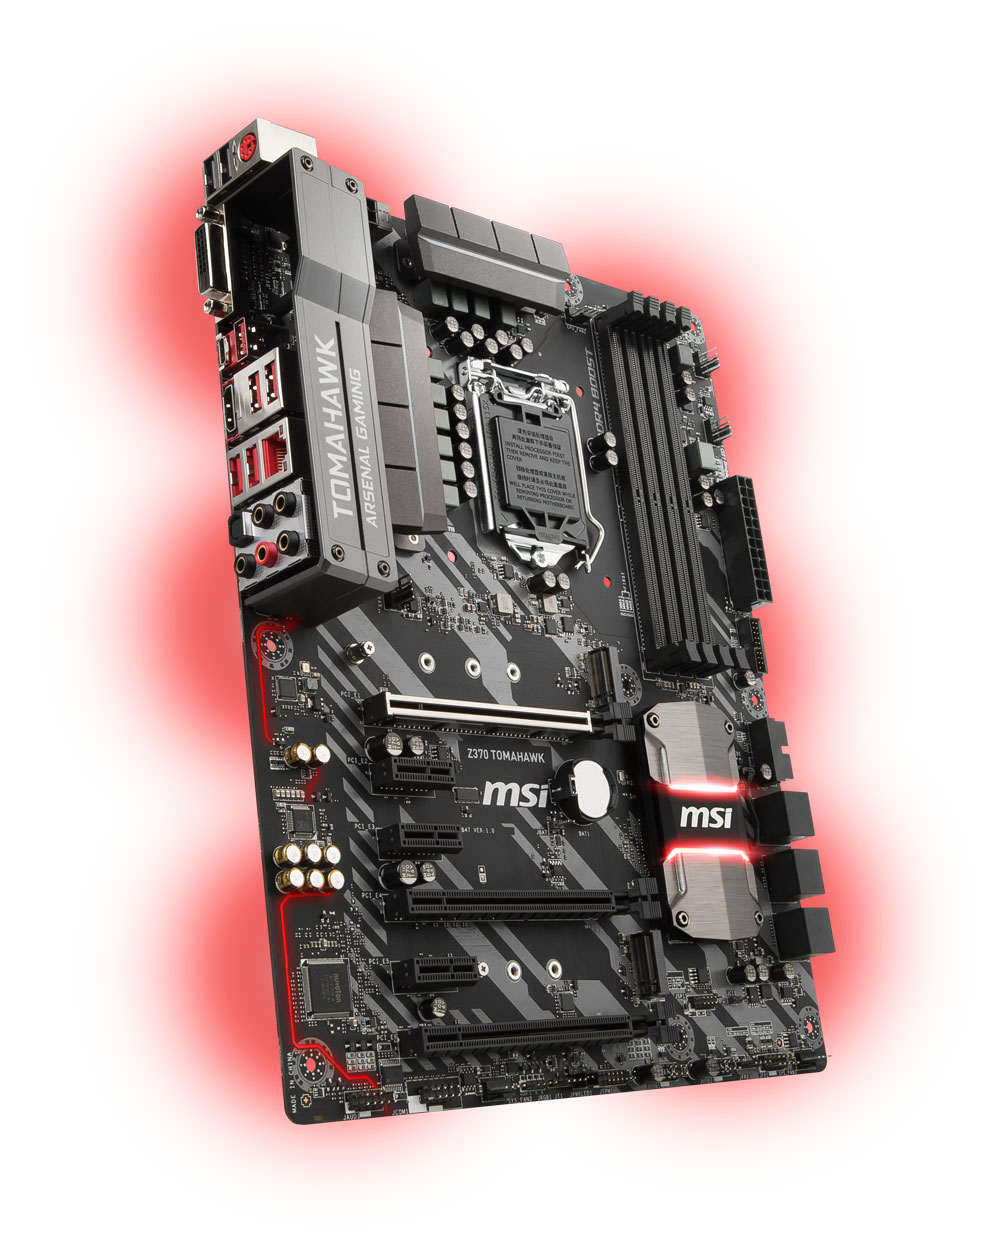 MSI Z370 TOMAHAWK Intel Motherboard - Free Shipping - South Africa